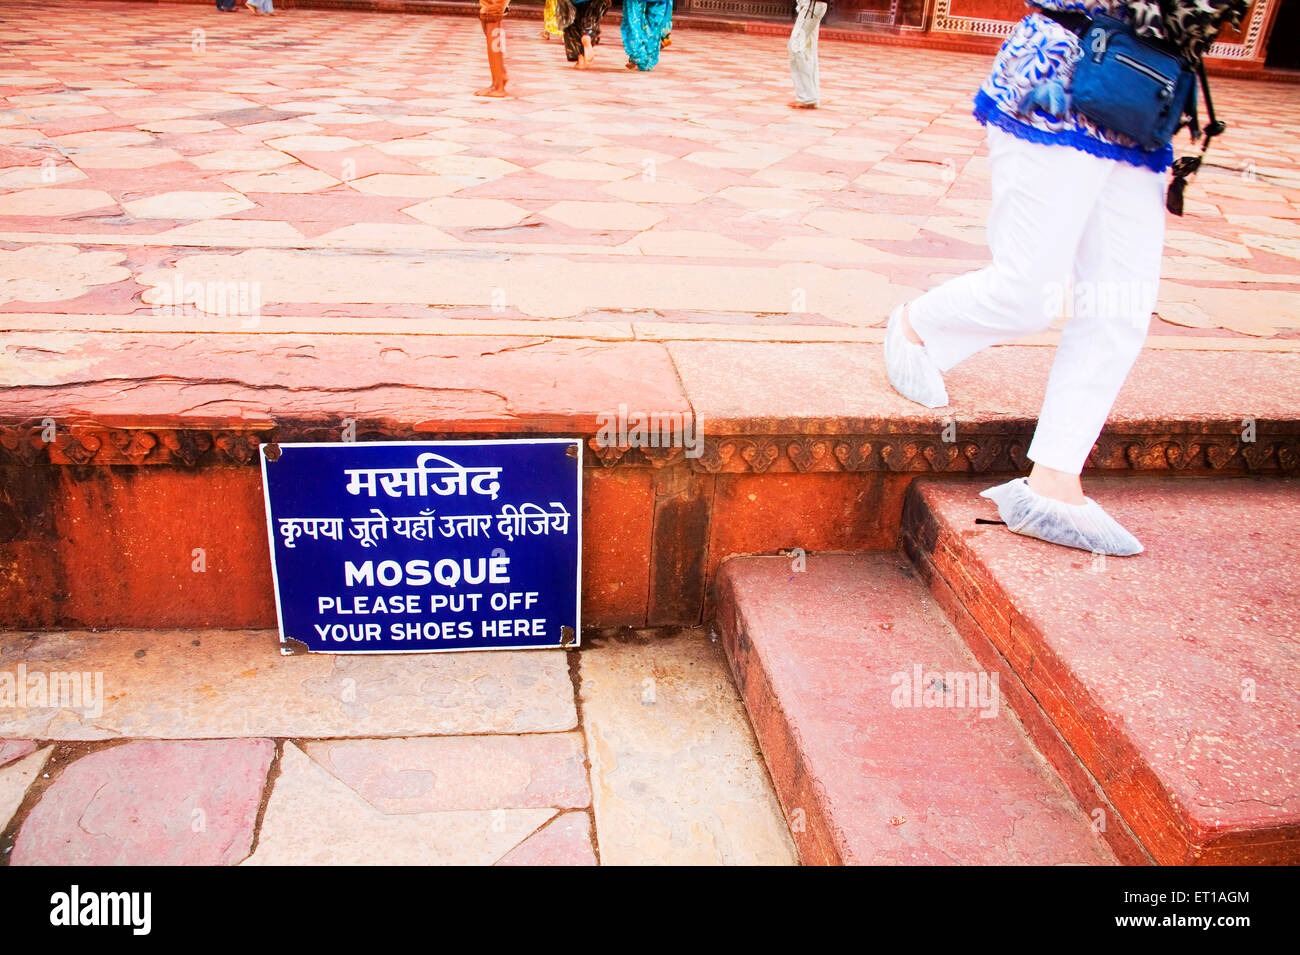 Tourist wearing white cover on her shoes walking on the red sand stone near the sign board at mosque , Taj Mahal , Agra , Uttar Pradesh , India Stock Photo